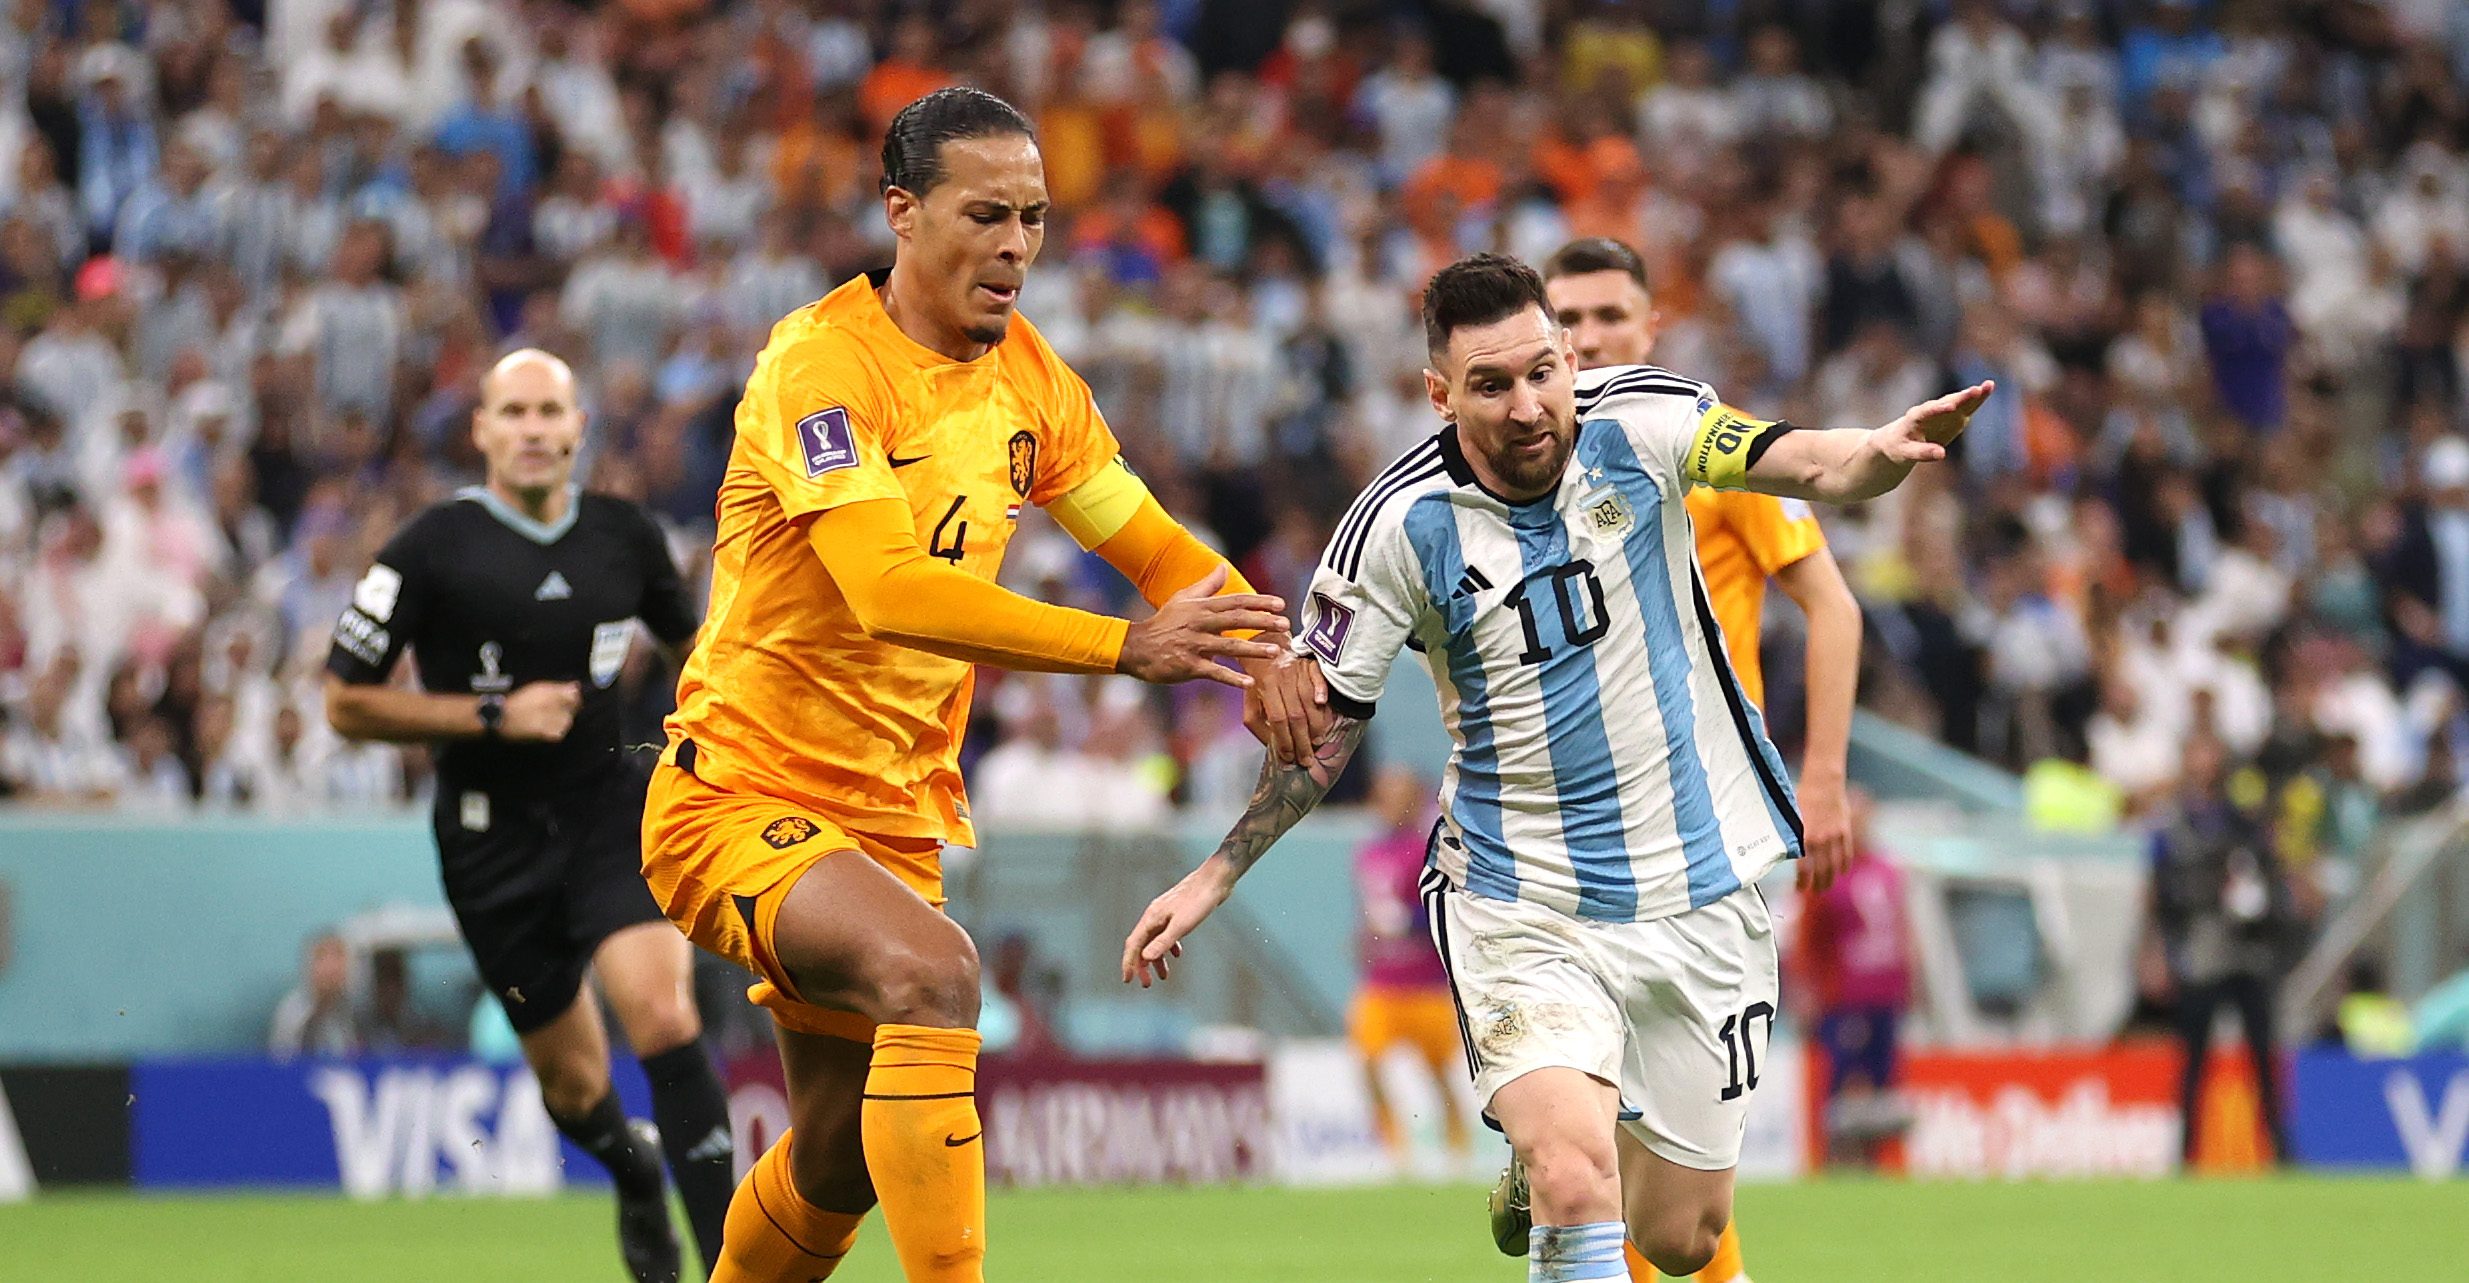 Argentina Defeats Netherlands on Penalties, Advances to World Cup
Semifinals